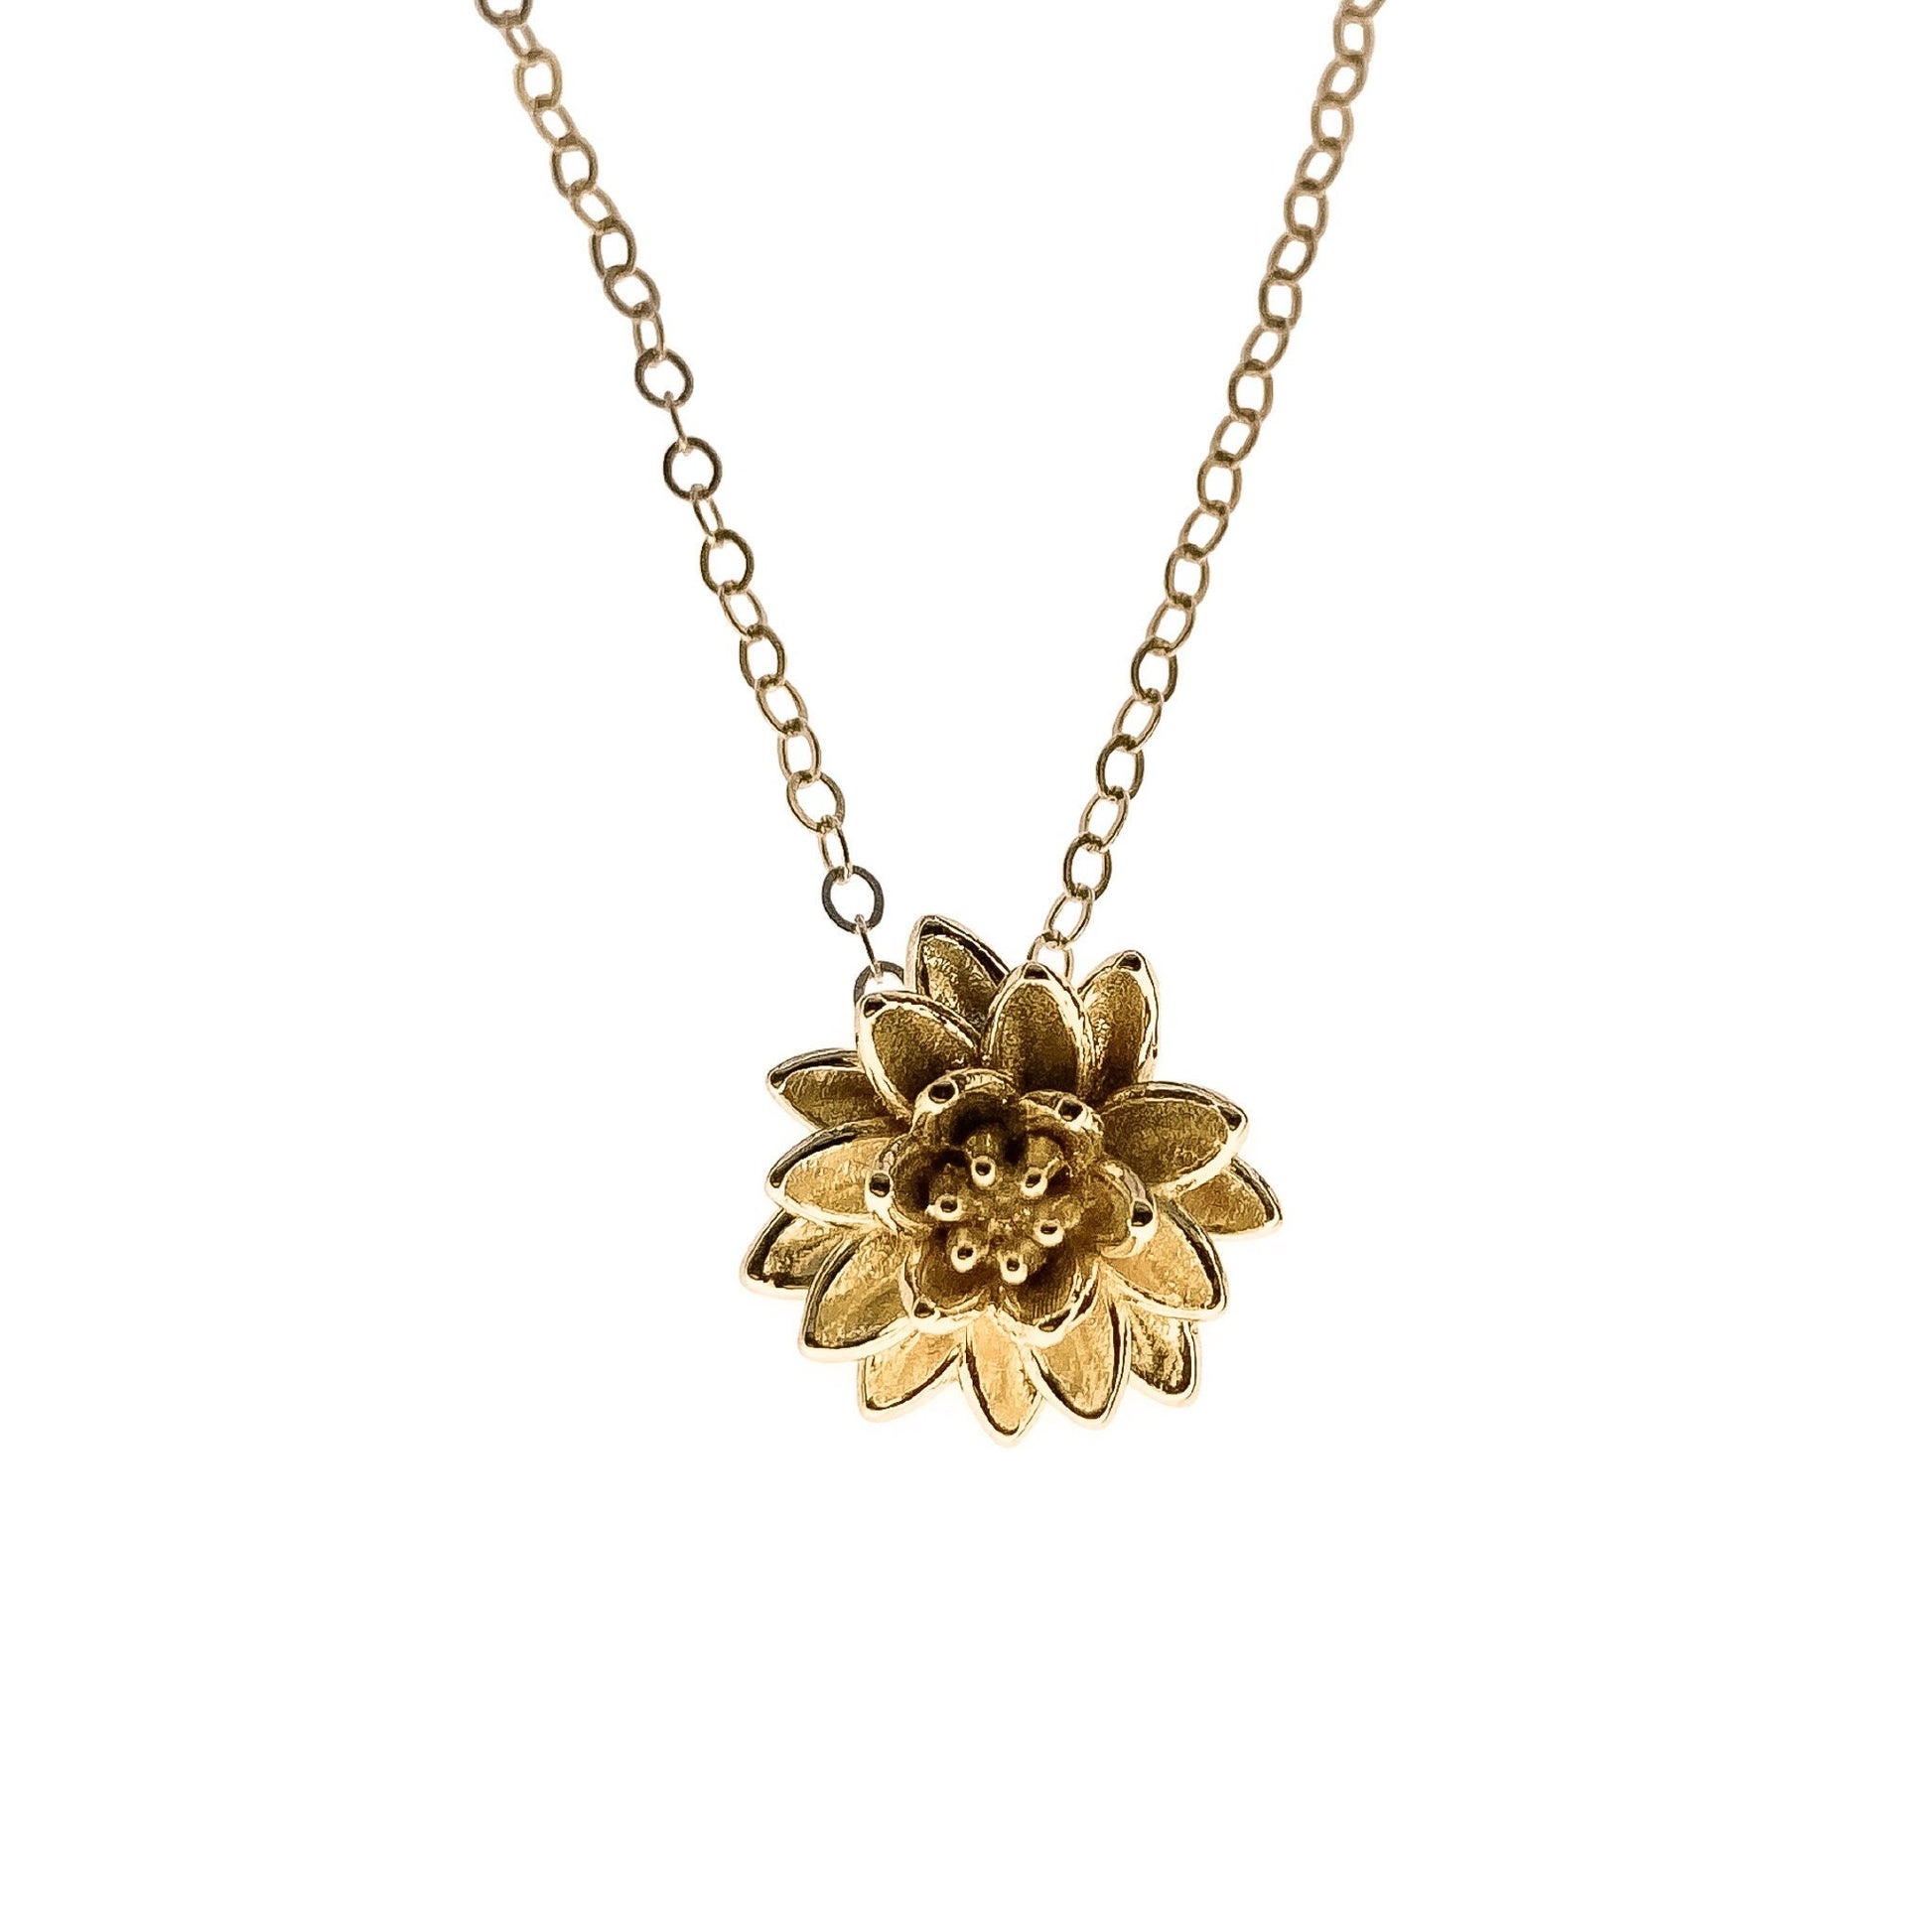 Waterlily Necklace